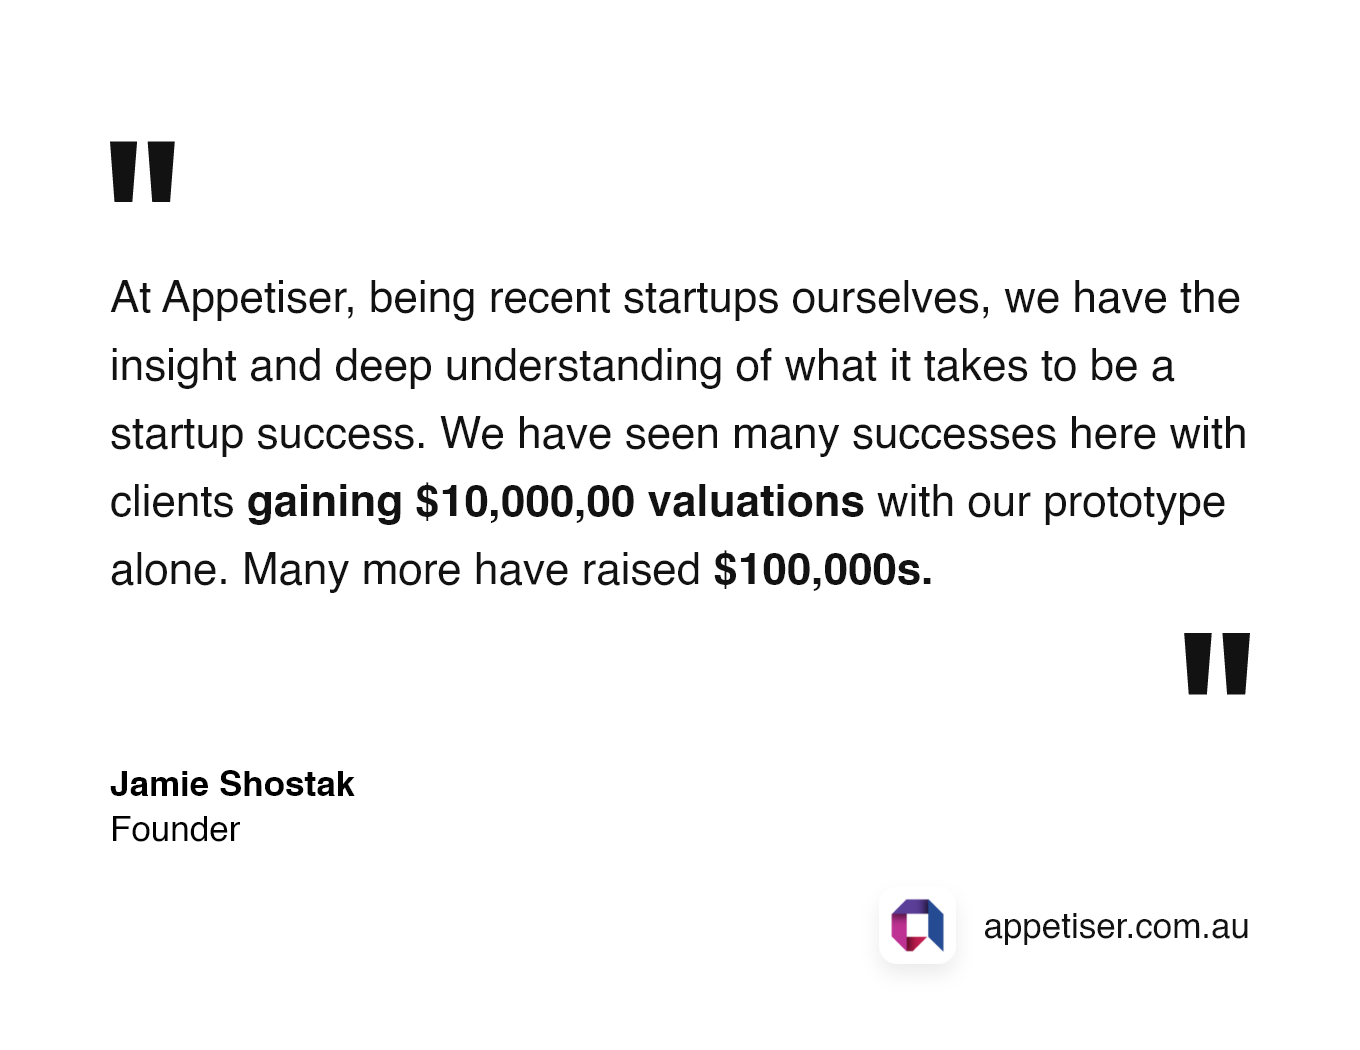 HAMAD: Jamie Shostak quote about startup success